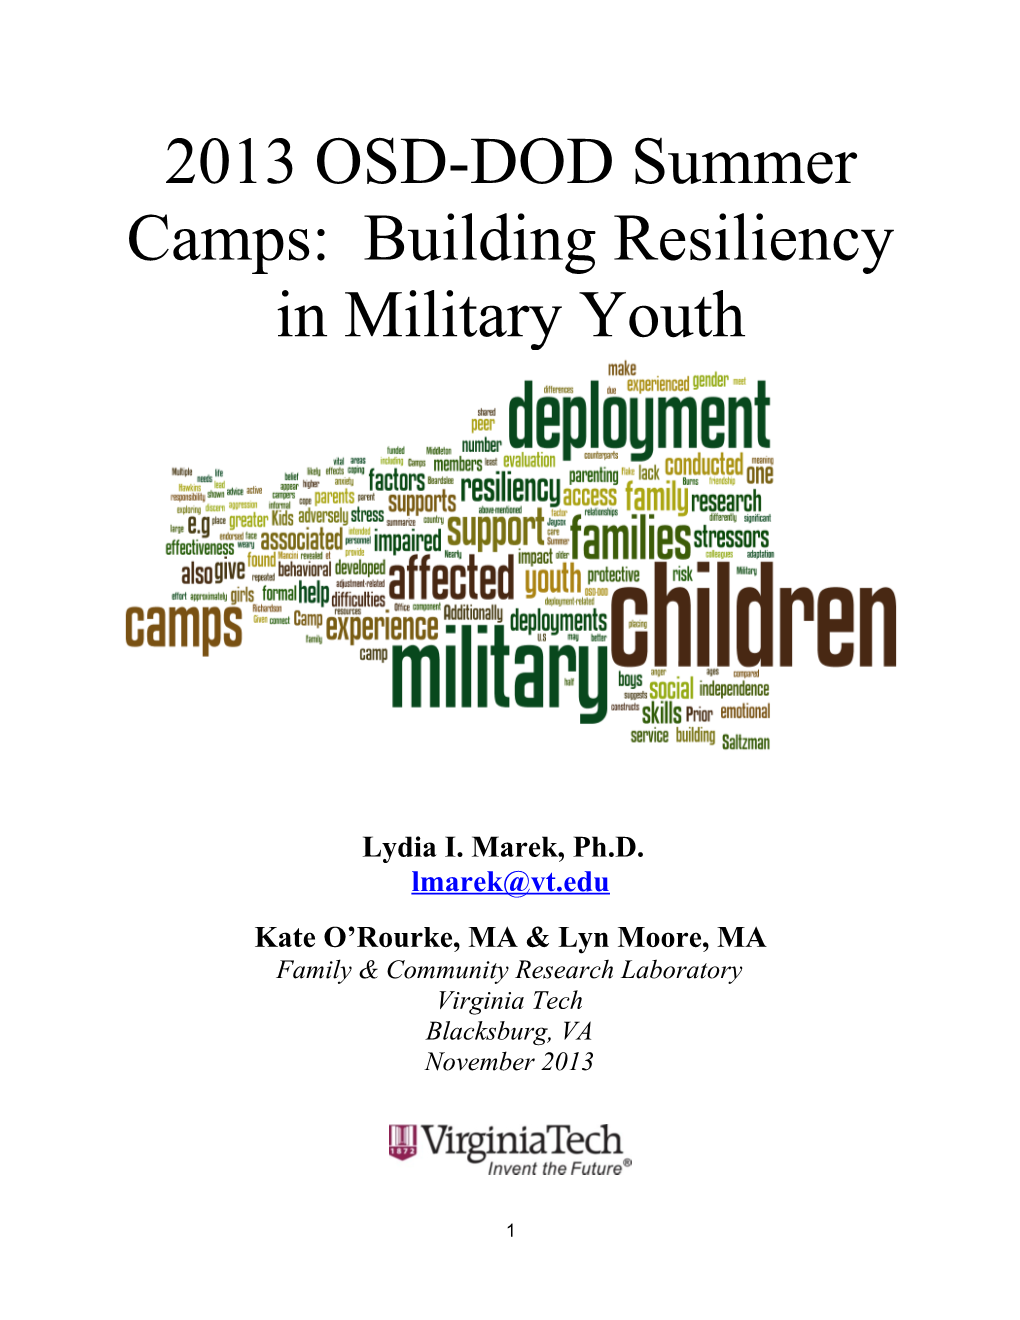 2013 OSD-DOD Summer Camps: Building Resiliency in Military Youth